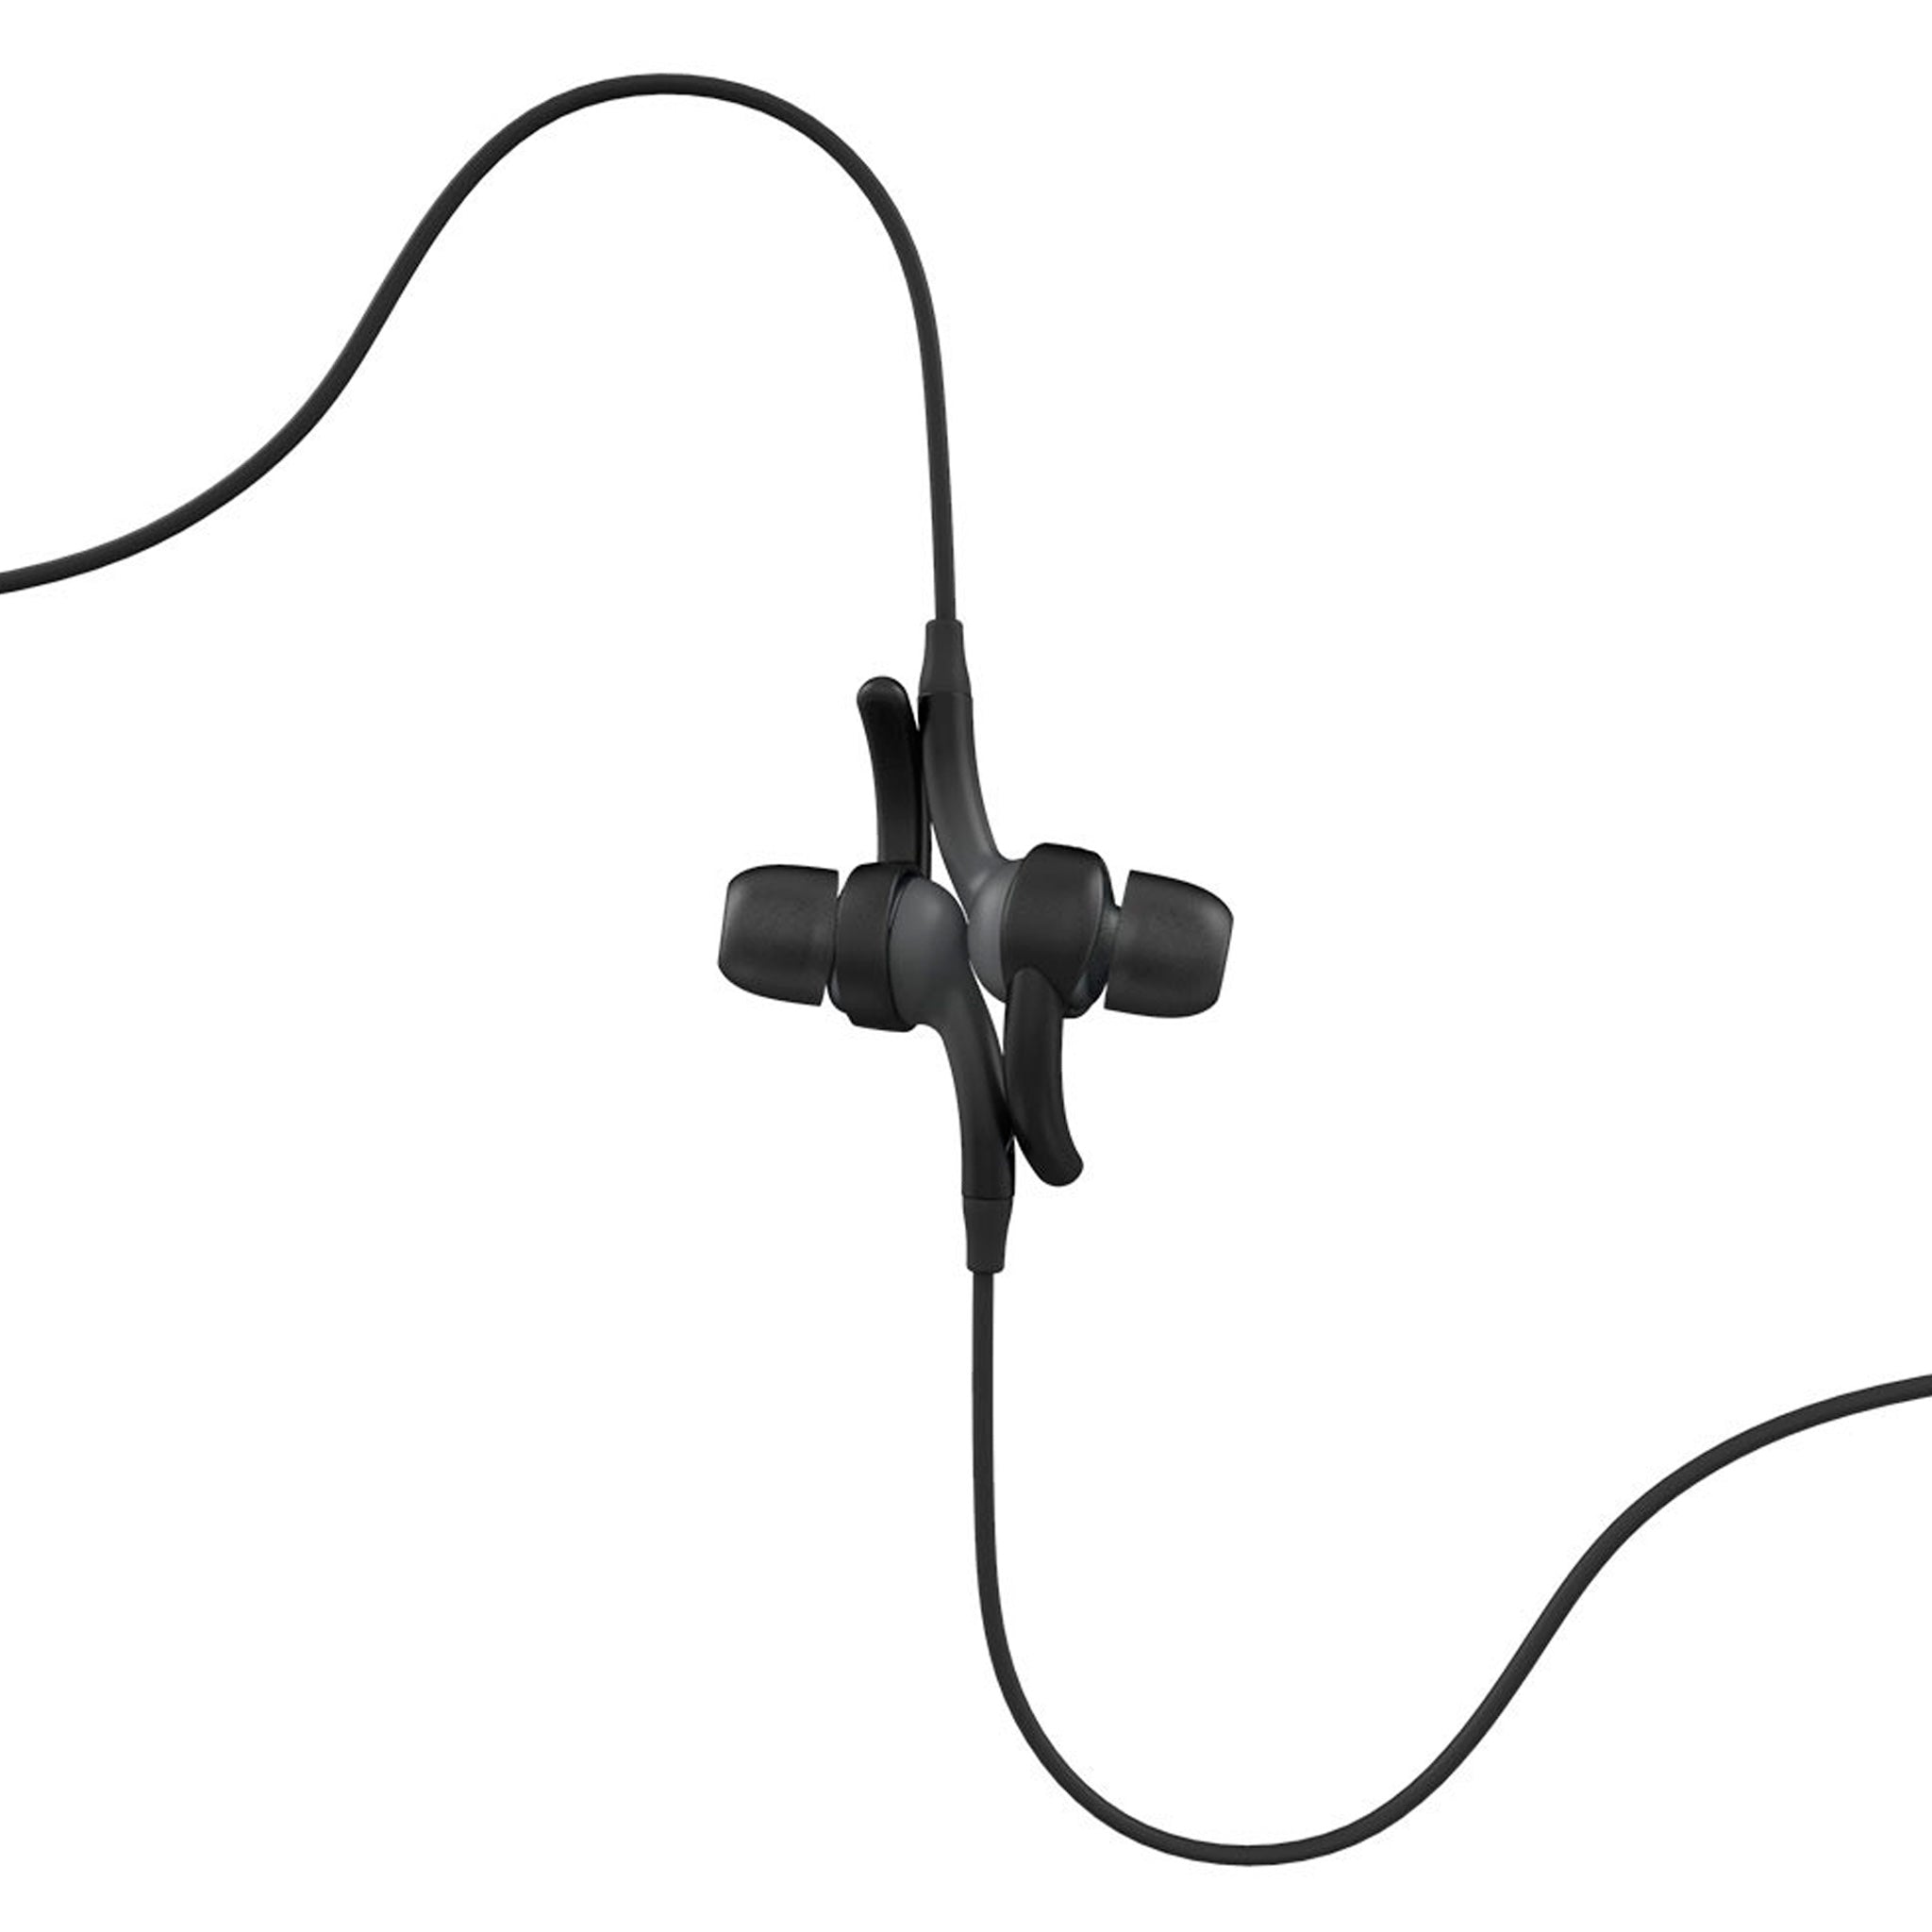 Ifrogz - Flex Force 2 In Ear Bluetooth Headphones - Black And Gray